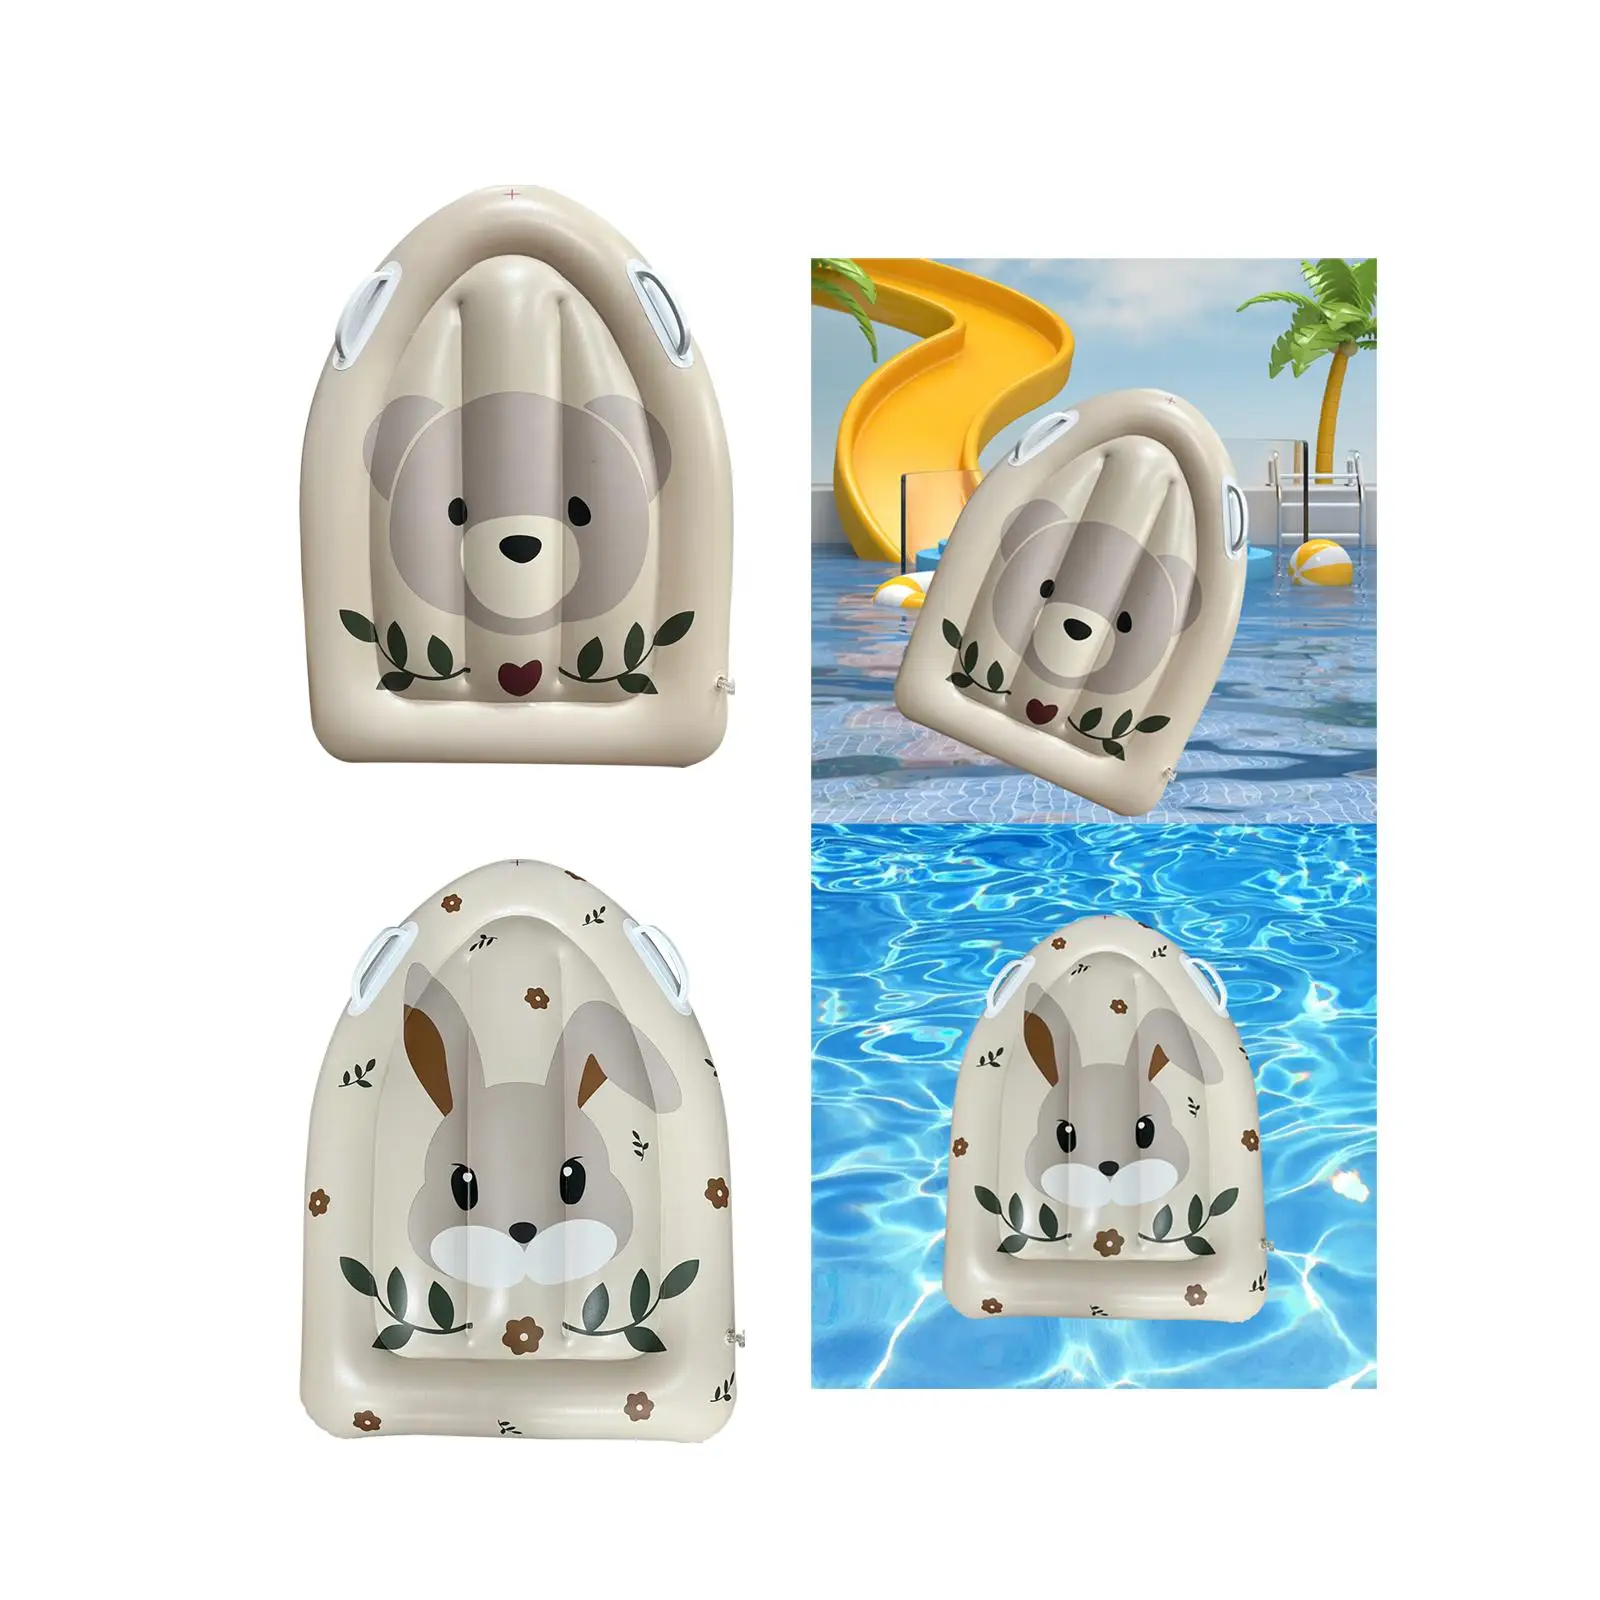 Inflatable Surfboard for Kids Soft Summer Floating Water Toys Beach Float Pool Floats Learning Swimming Surf Board for Beach